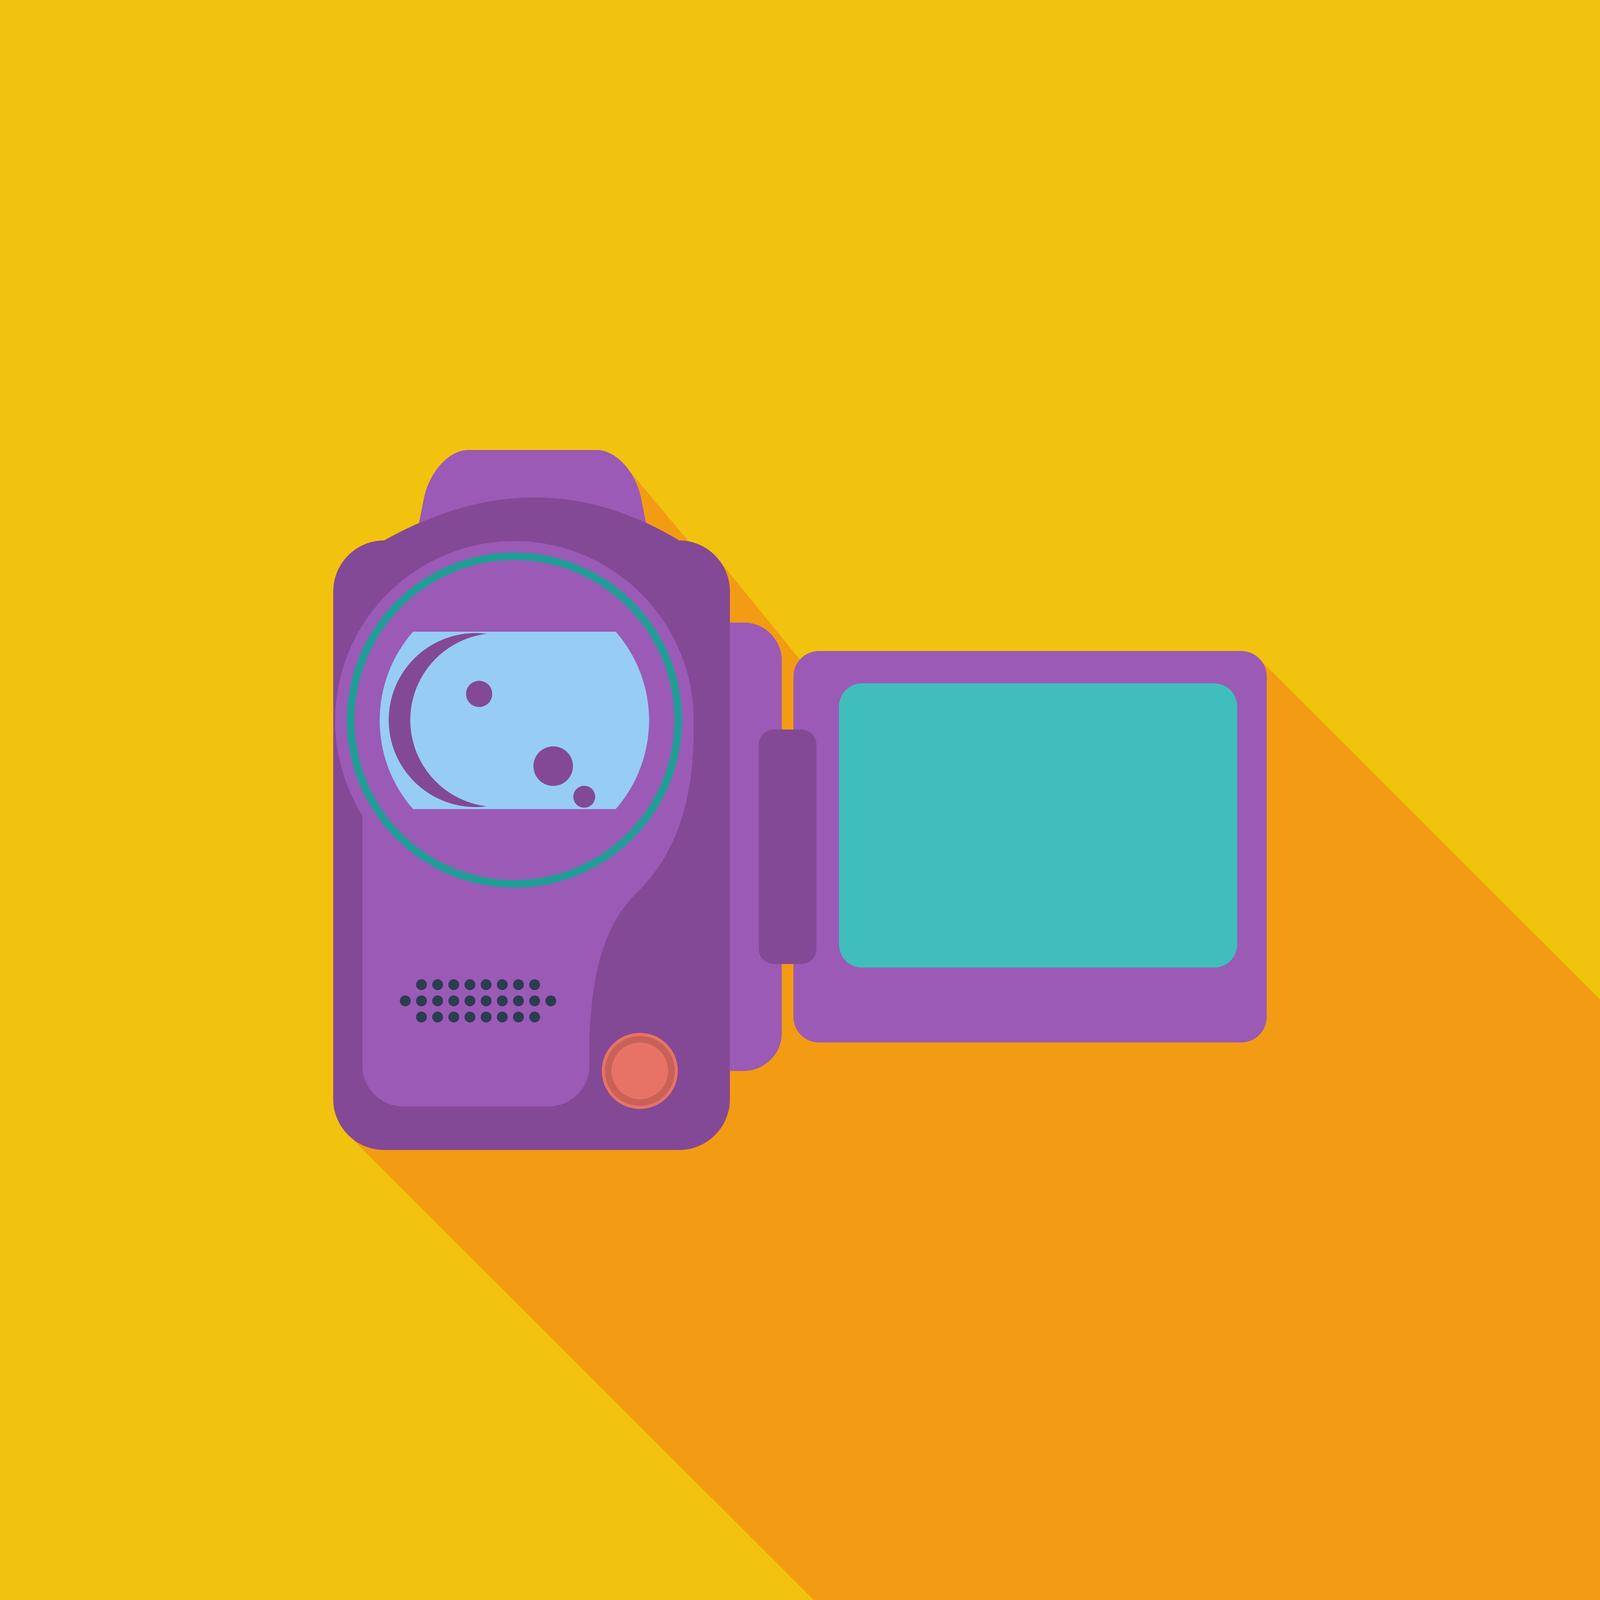 Video camera icon. Flat vector related icon with long shadow for web and mobile applications. It can be used as - logo, pictogram, icon, infographic element. Vector Illustration.